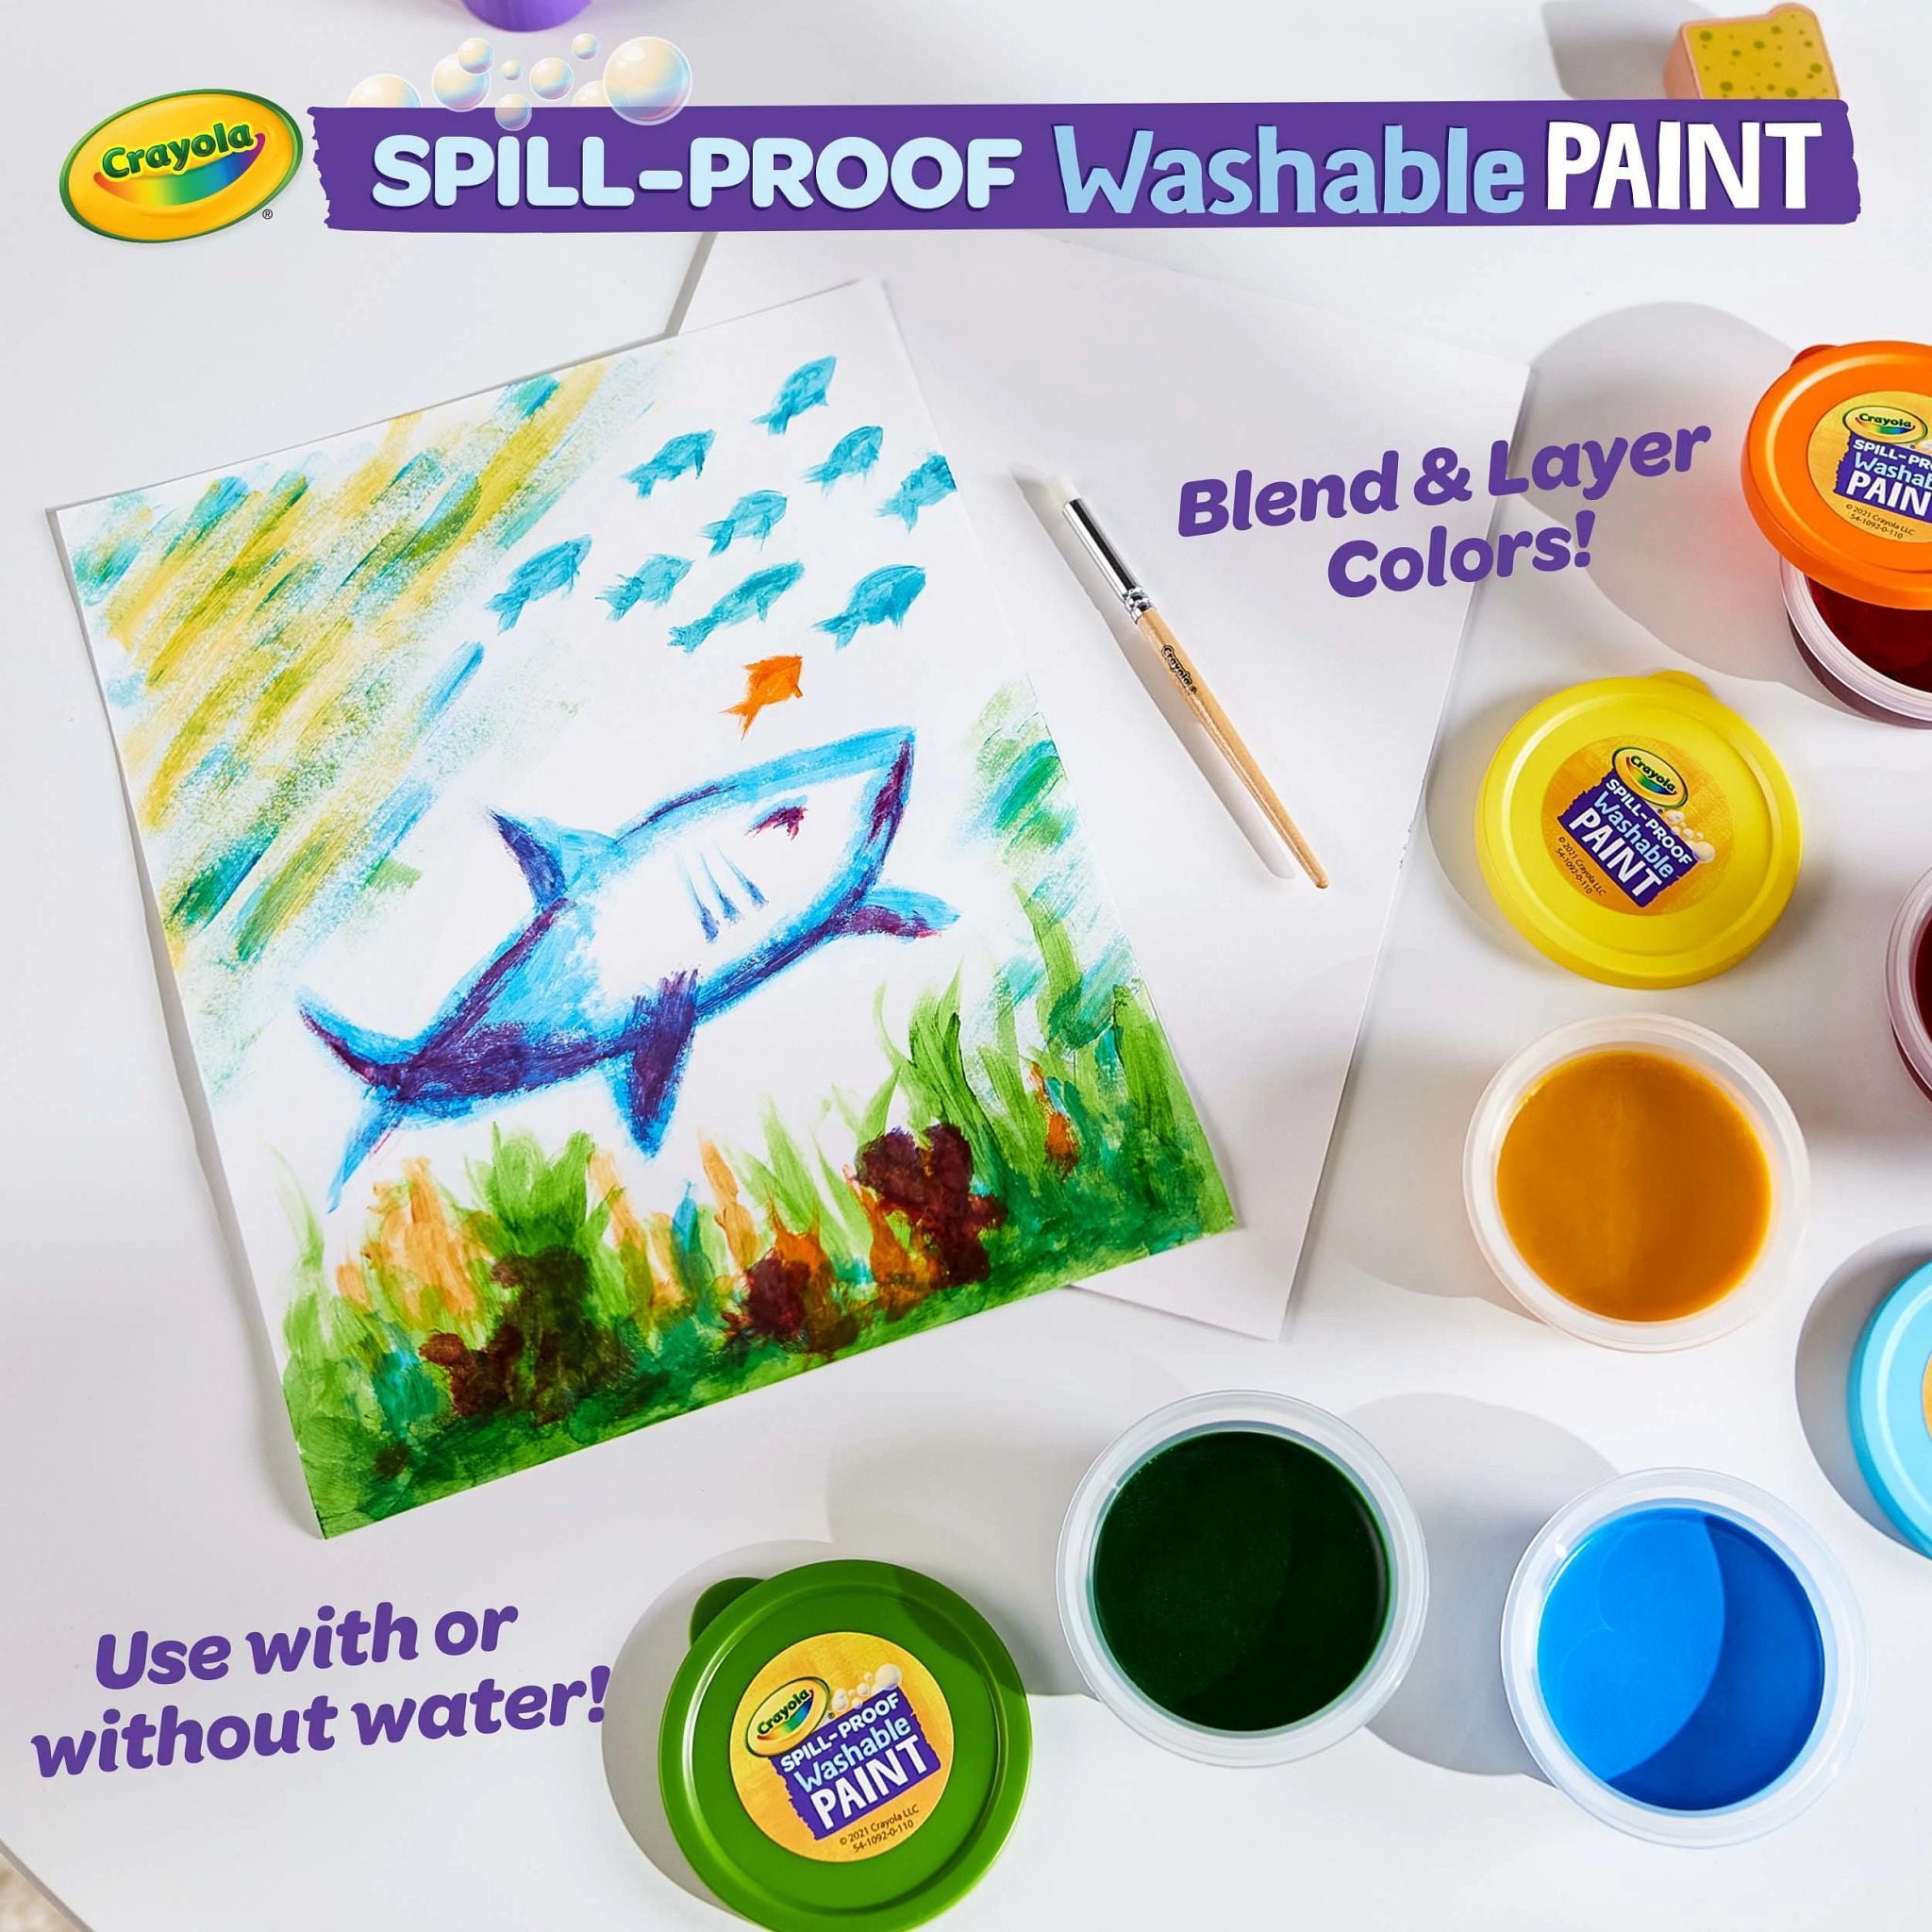  Crayola Spill Proof Watercolor Paint Set, Washable